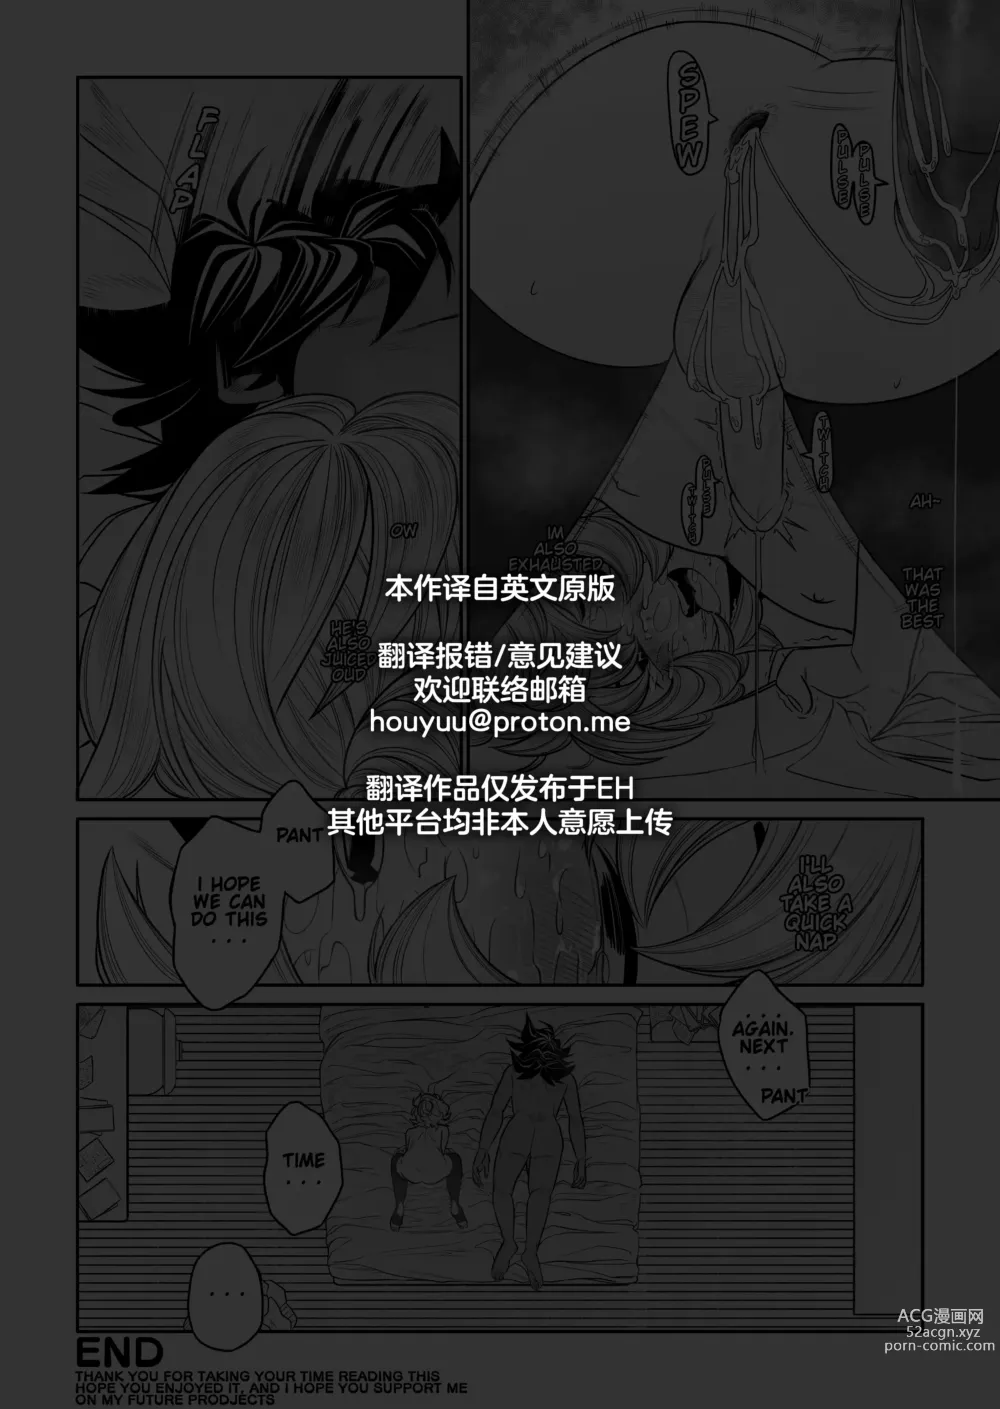 Page 25 of doujinshi 狡猾小恶魔